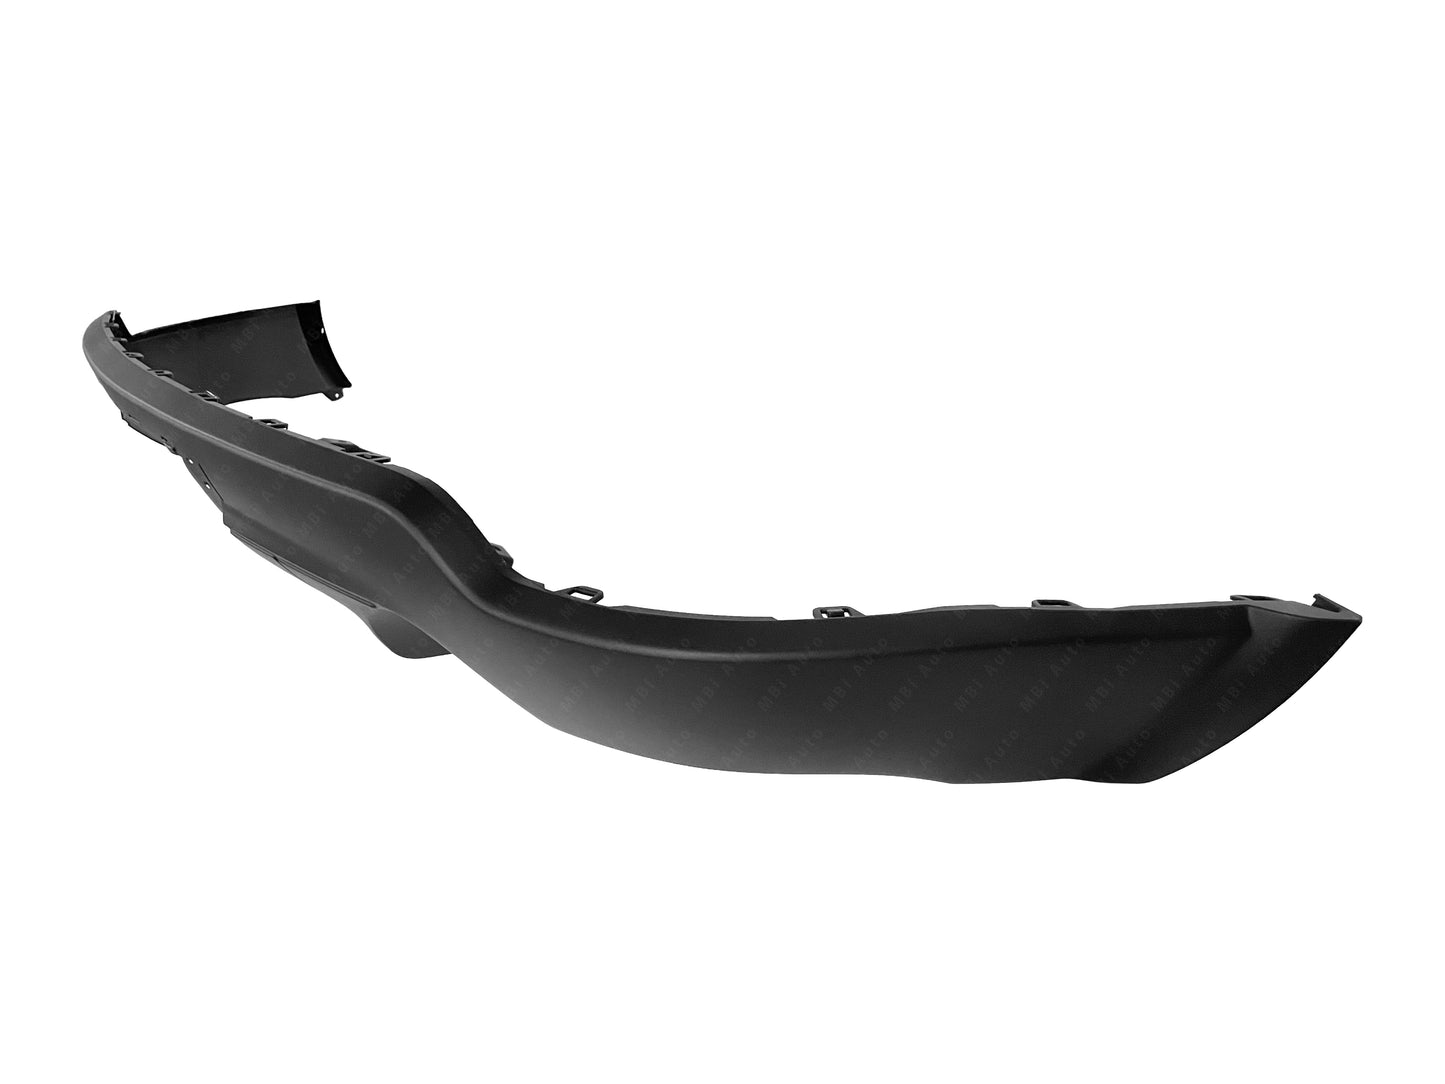 Jeep Grand Cherokee 2011 - 2021 Rear Textured Lower Bumper Cover 11 - 21 CH1195104 Bumper-King